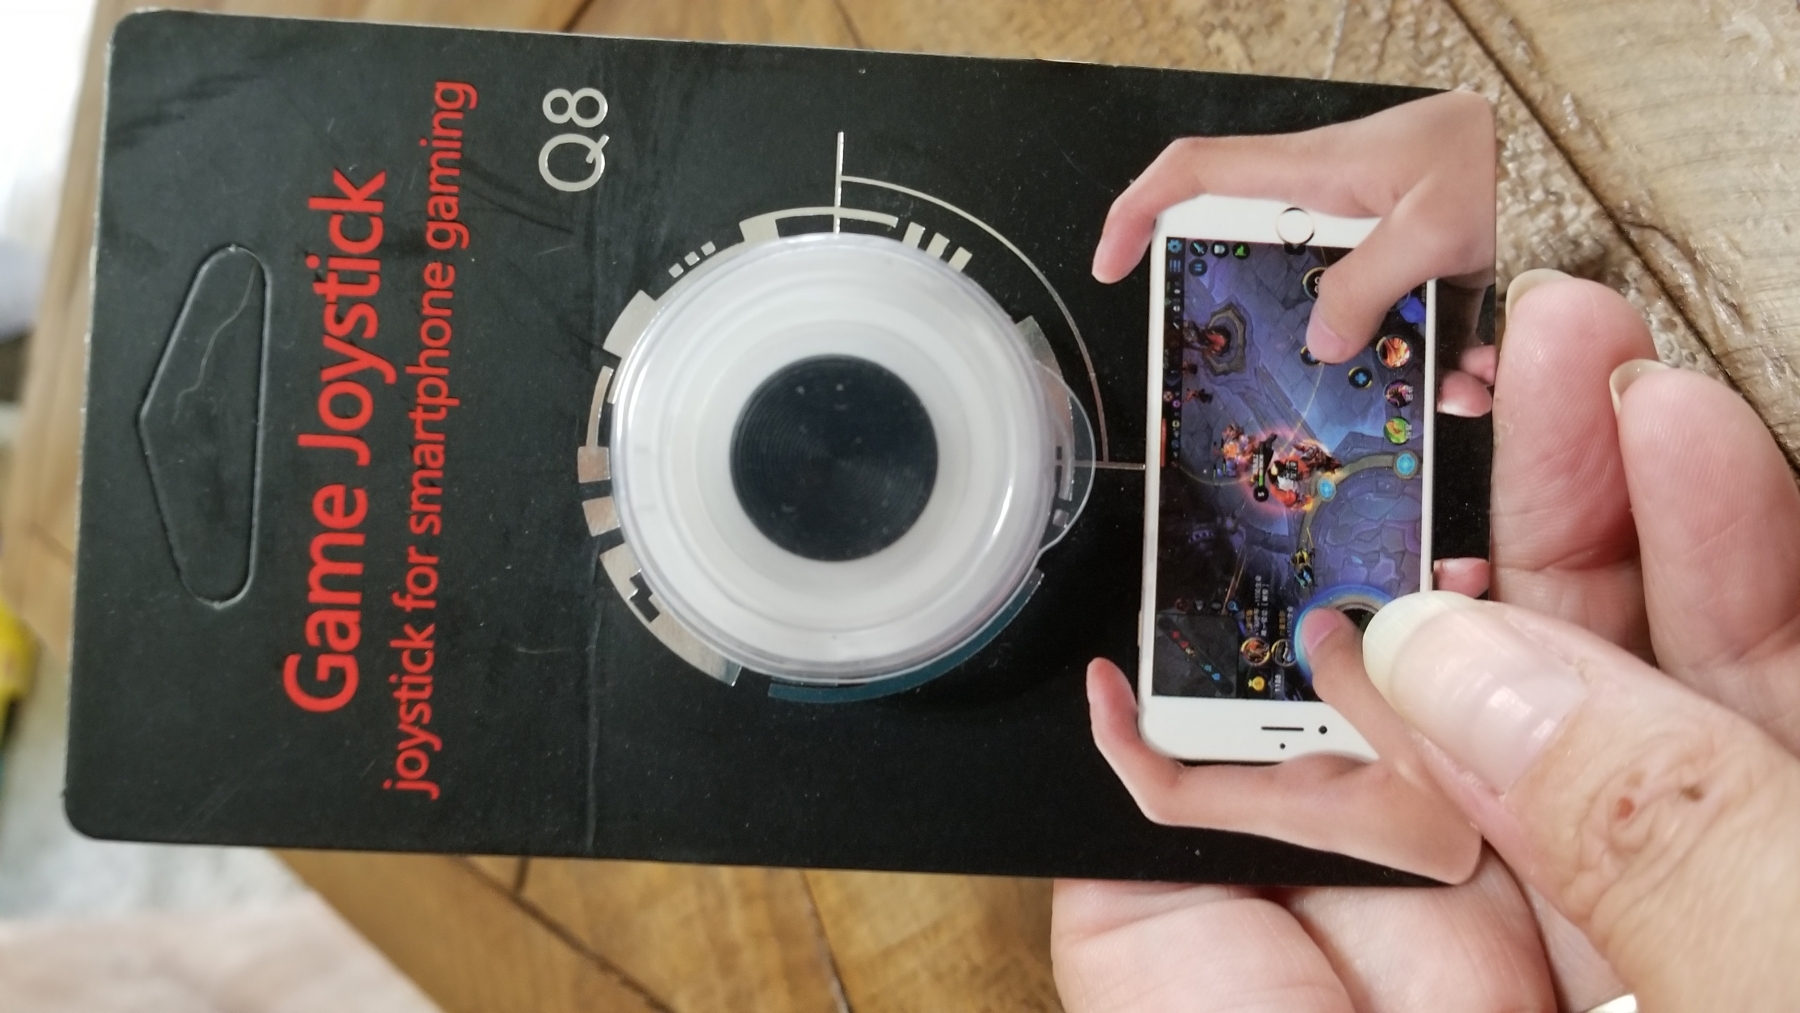 A different way to play games on your phone